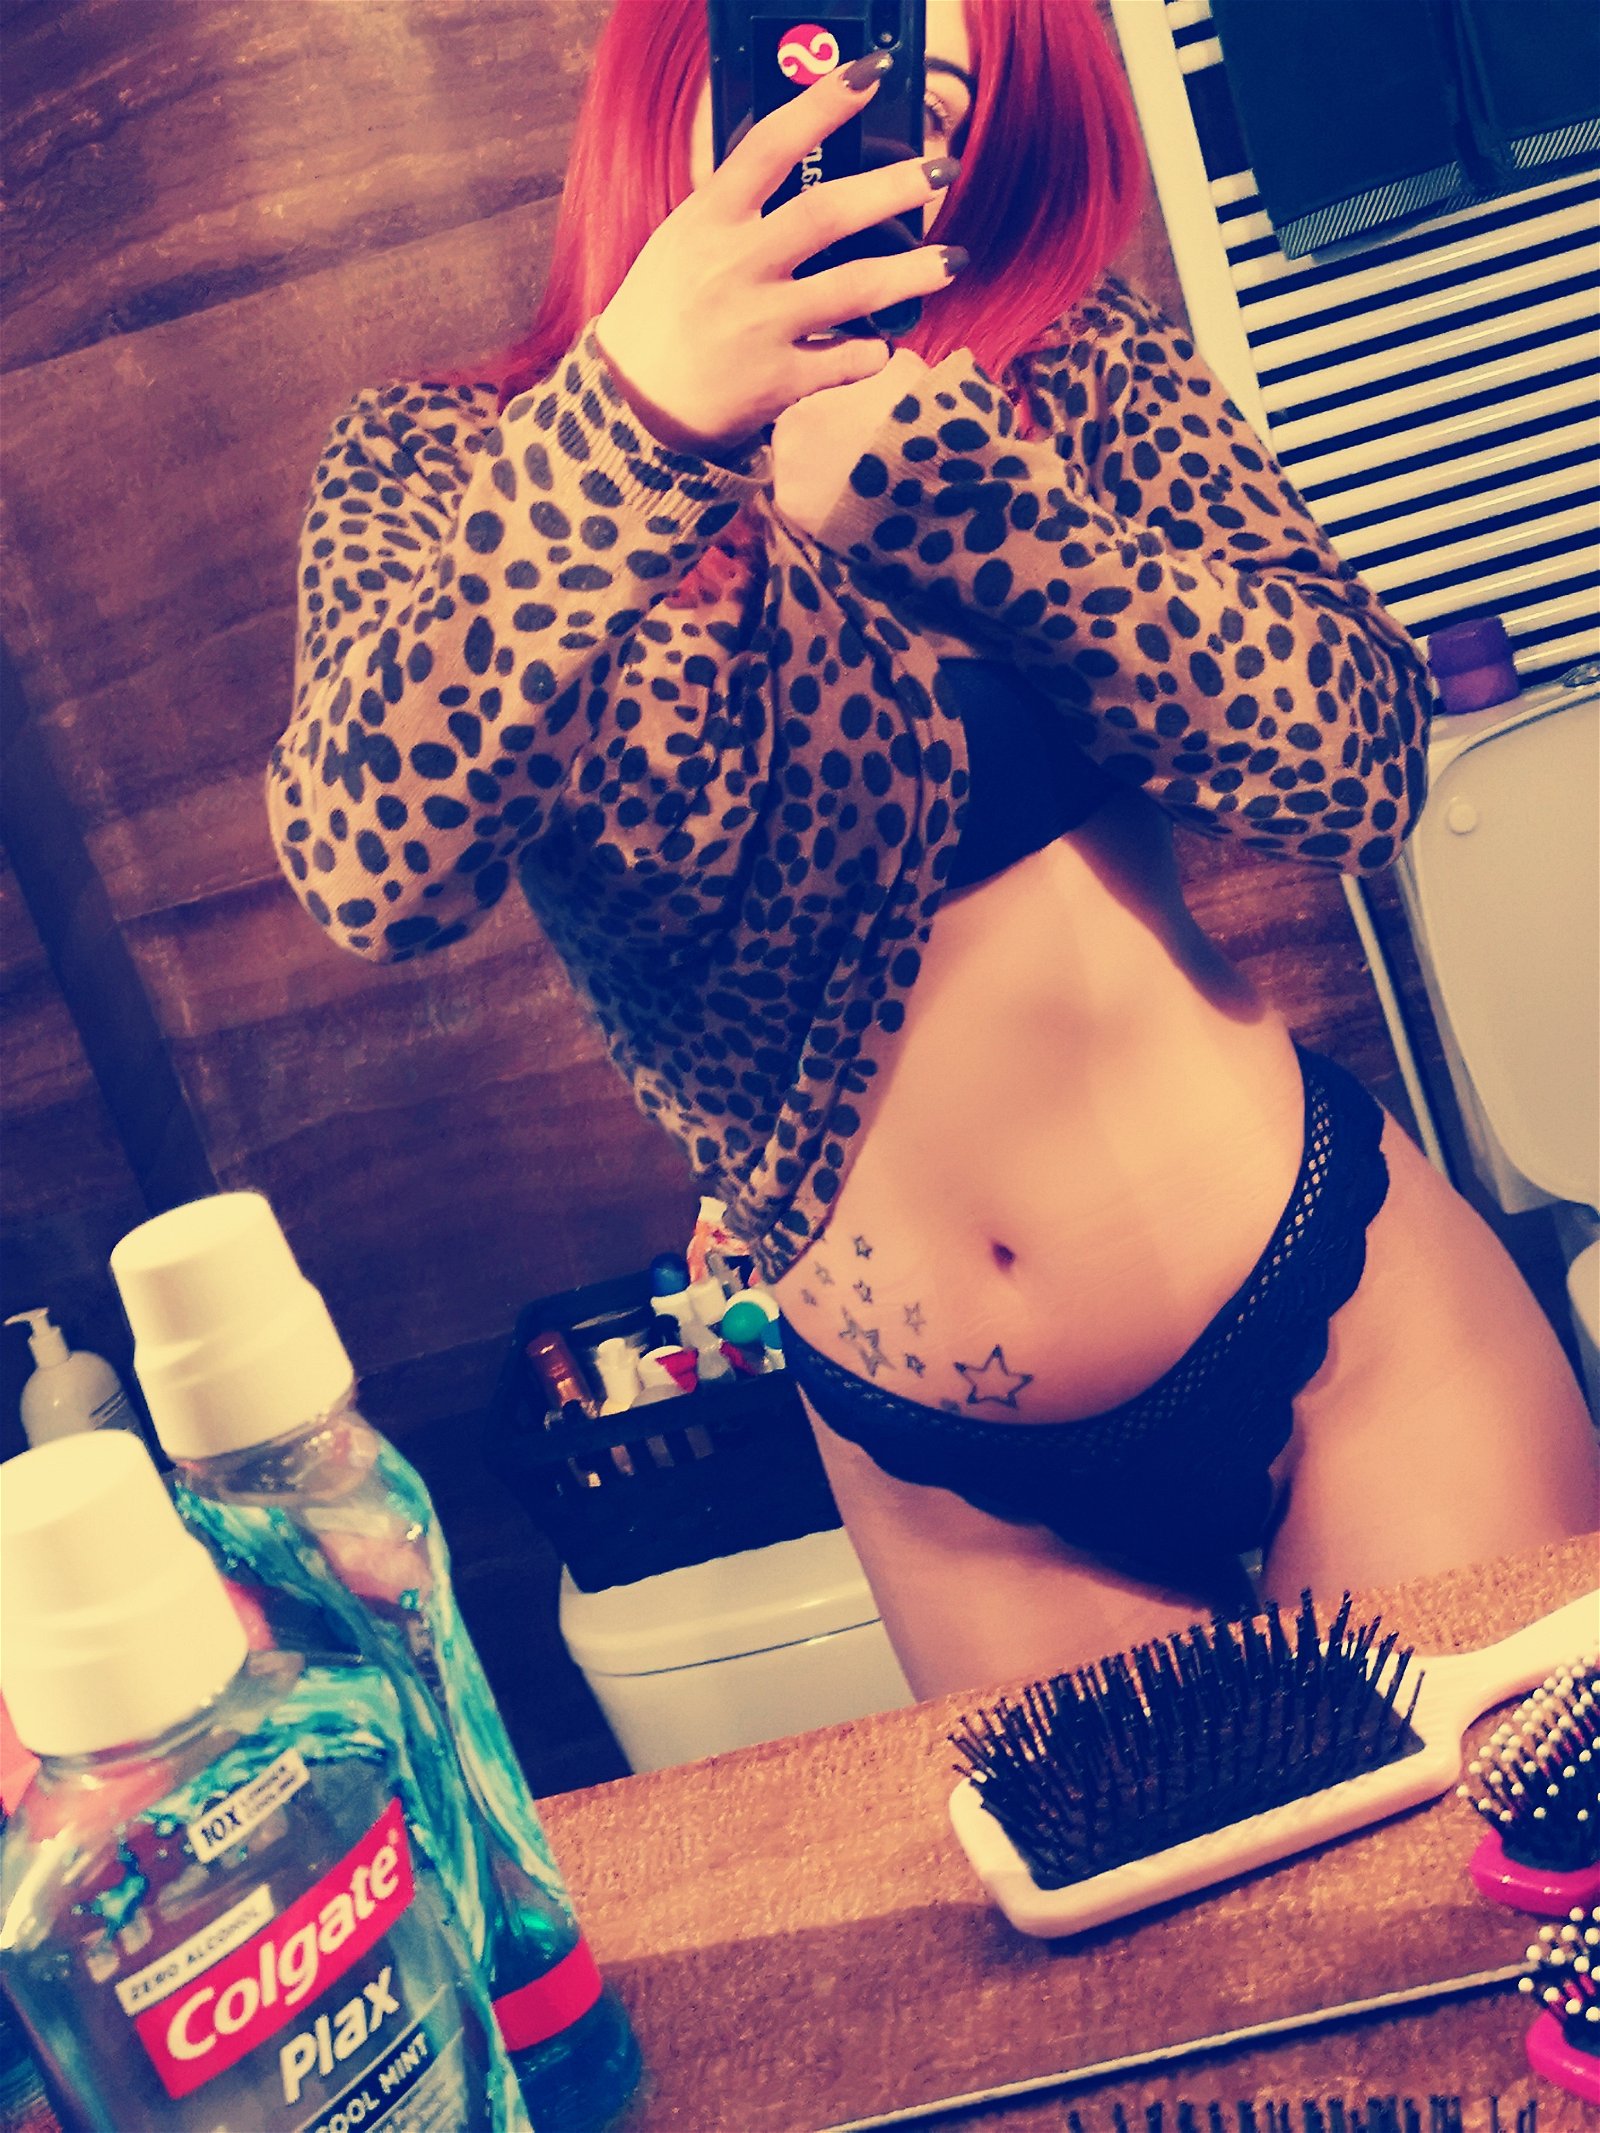 Photo by Gia Chains with the username @GiaChains, who is a star user,  January 27, 2019 at 9:34 PM. The post is about the topic Amateurs and the text says '#sharesome #onlyfans #Xhamster #pornhub #Xvideos #ManyVids #instagram #sexy #sexyred'